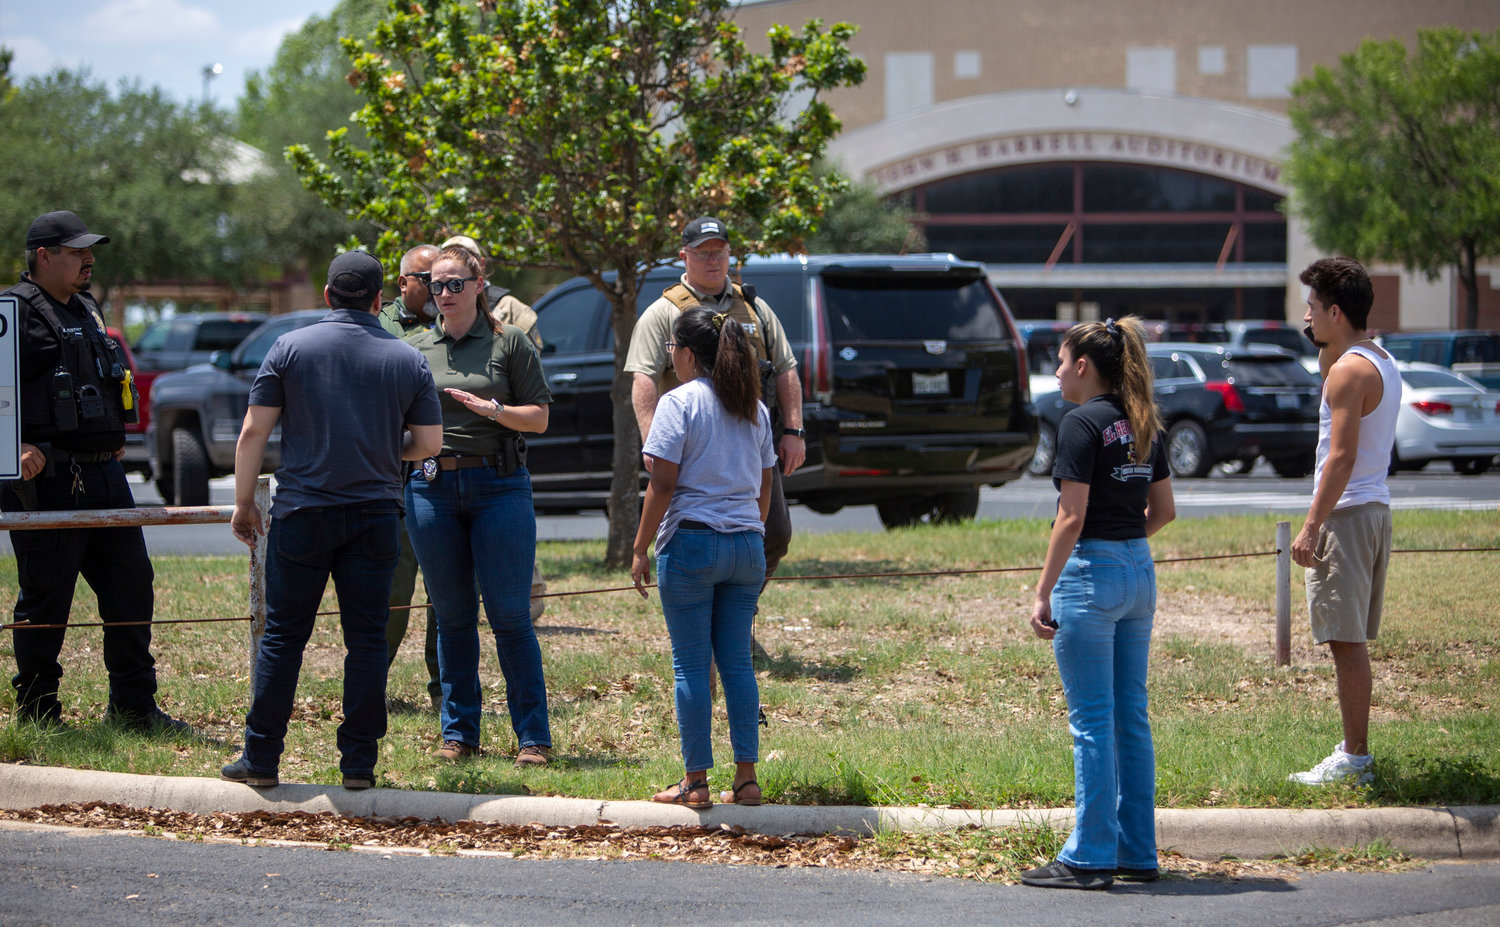 A law enforcement officer tells people Tuesday afternoon, May 24, 2022, that Uvalde High School is secure after a school shooting at the nearby Robb Elementary School in Uvalde, Texas. (William Luther/San Antonio Express-News/Zuma Press/TNS)